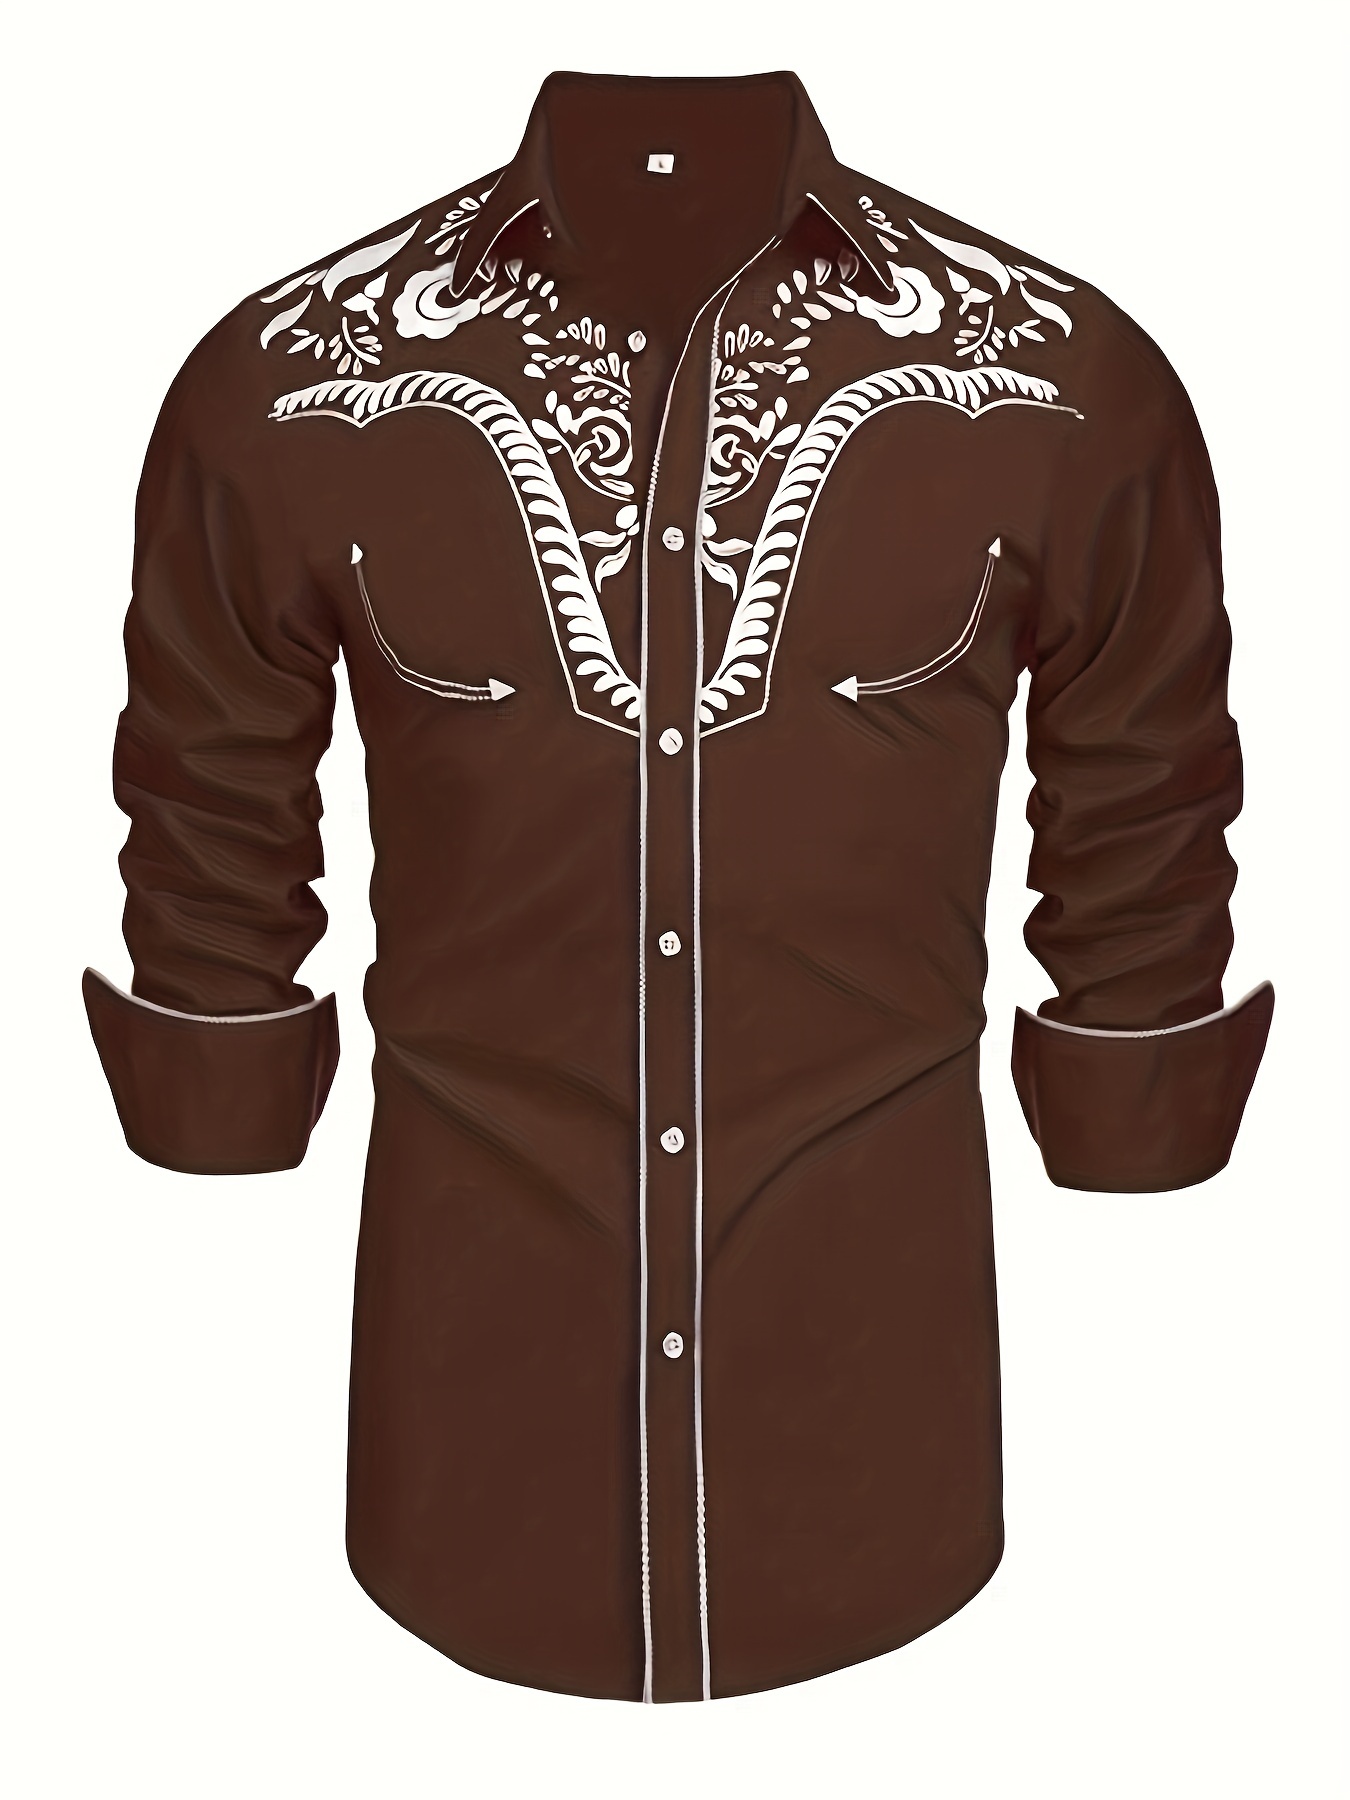 Women's Western Shirt Long Sleeve Embroidered Slim Fit Blusa